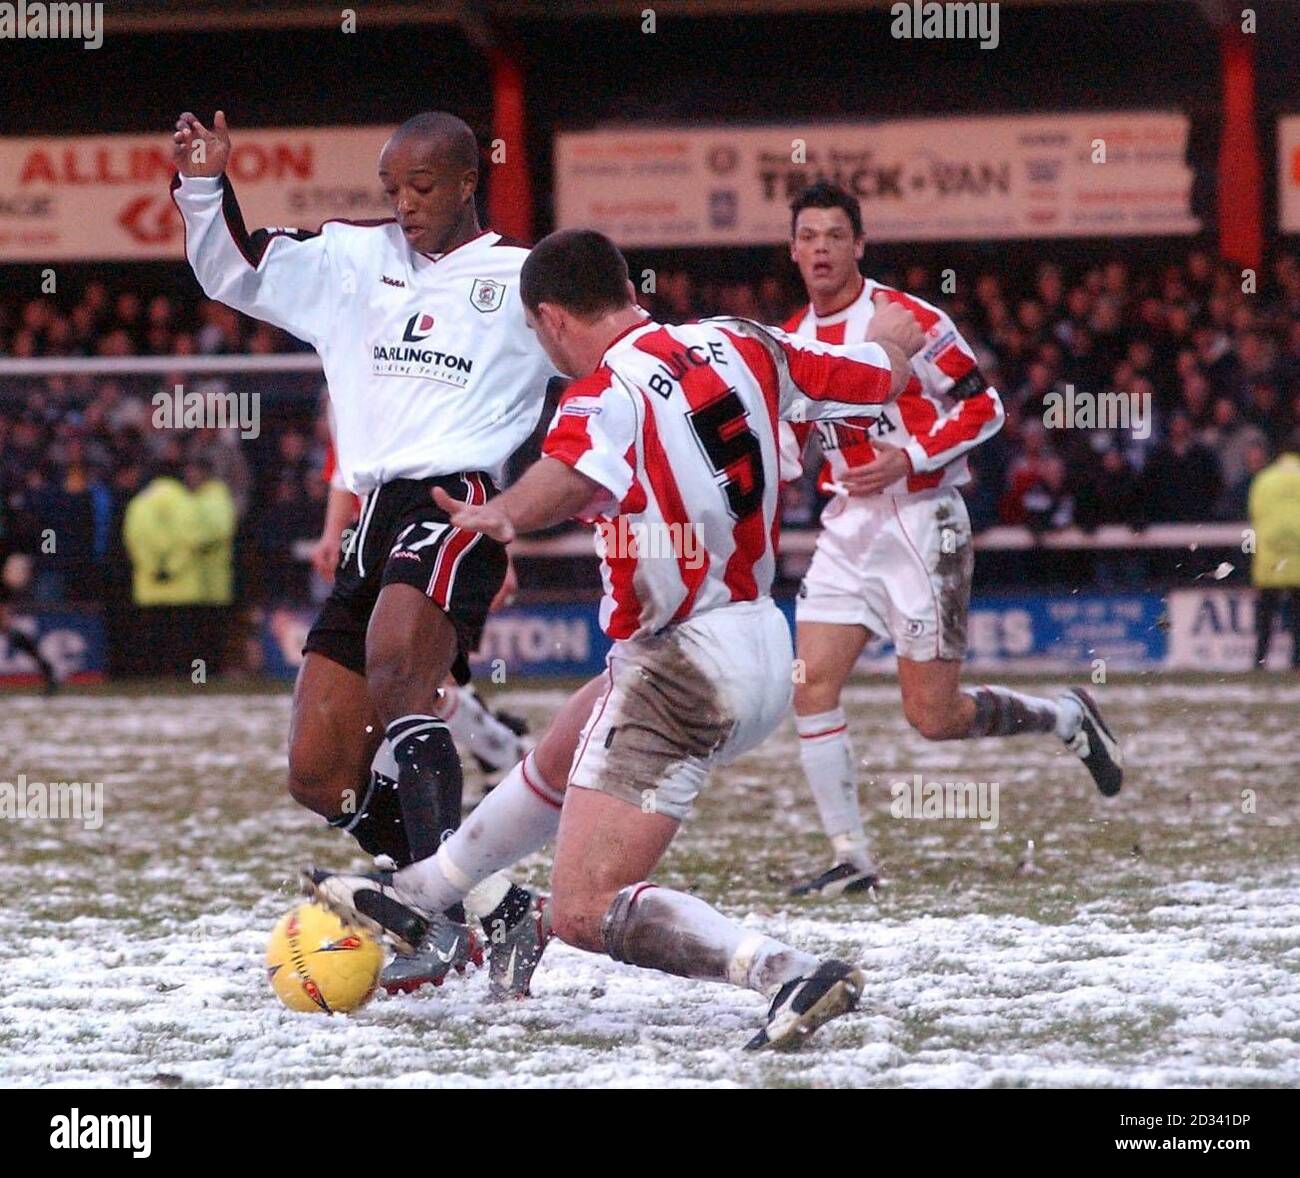 Darlington's Richard Offiong (left) in action against Farnborough's Gareth Griffiths during their FA Cup Third Round match at Darlington's Feethams Ground. Stock Photo